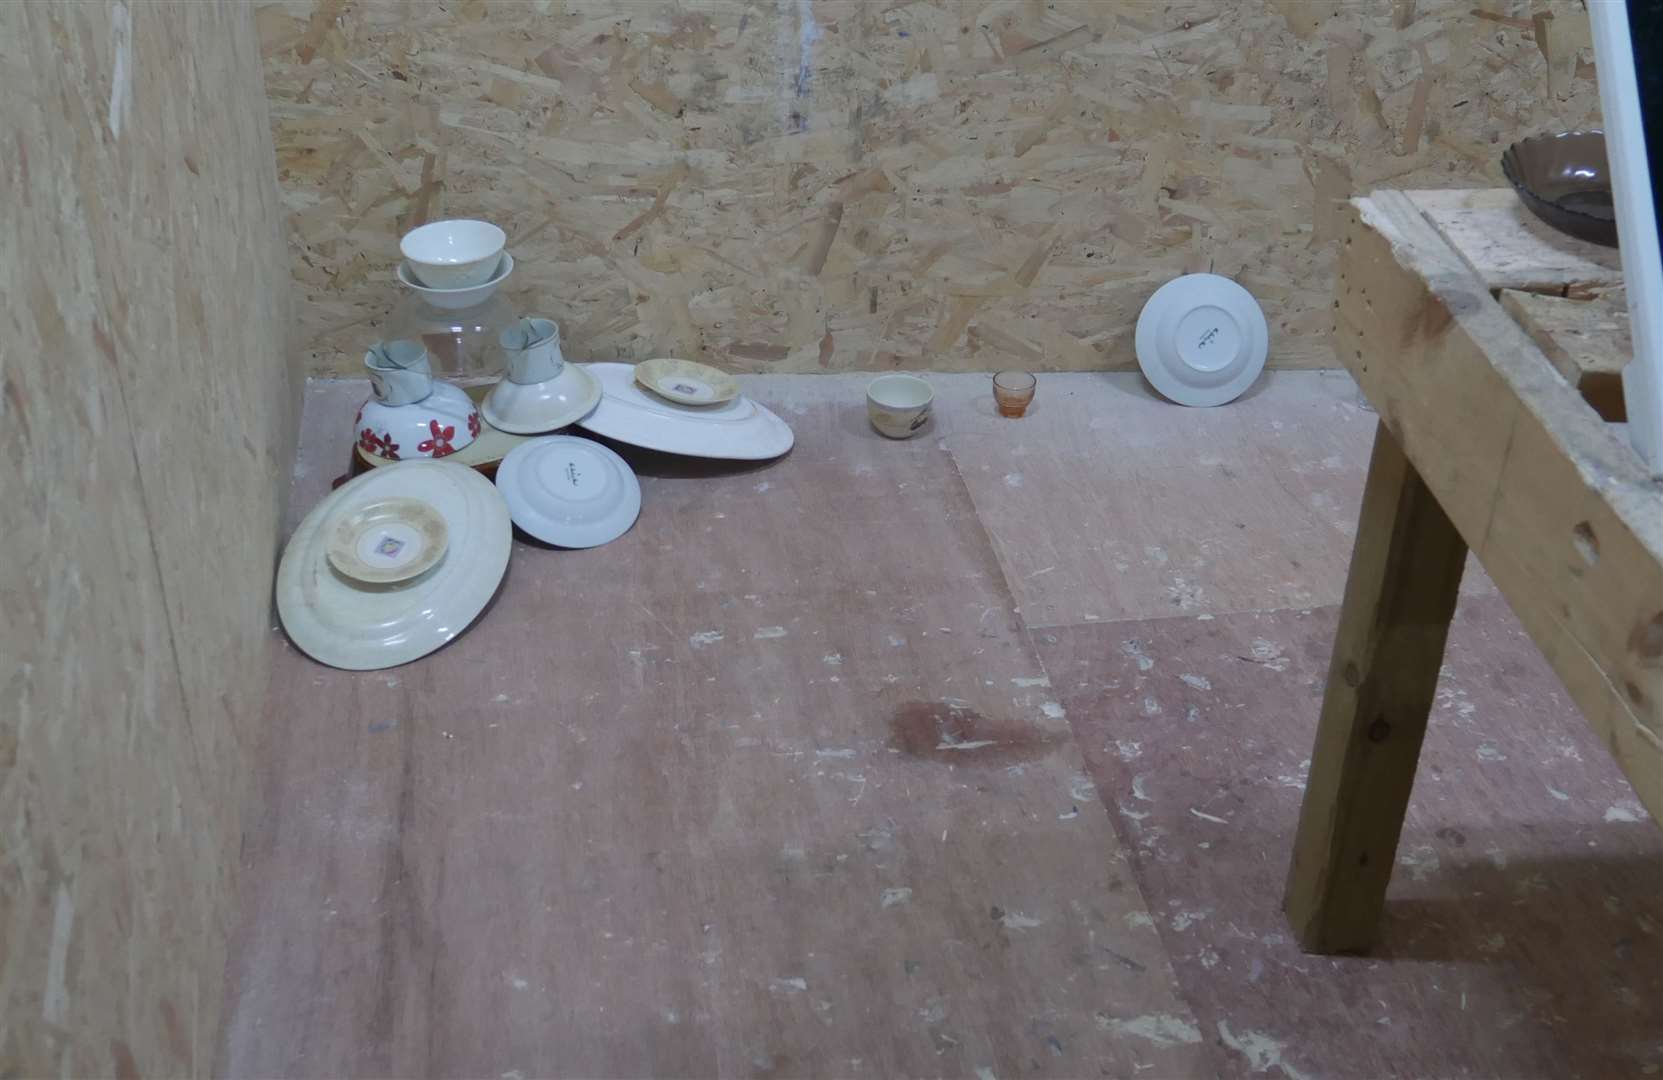 Mugs and plates were put in the corner of the rage room